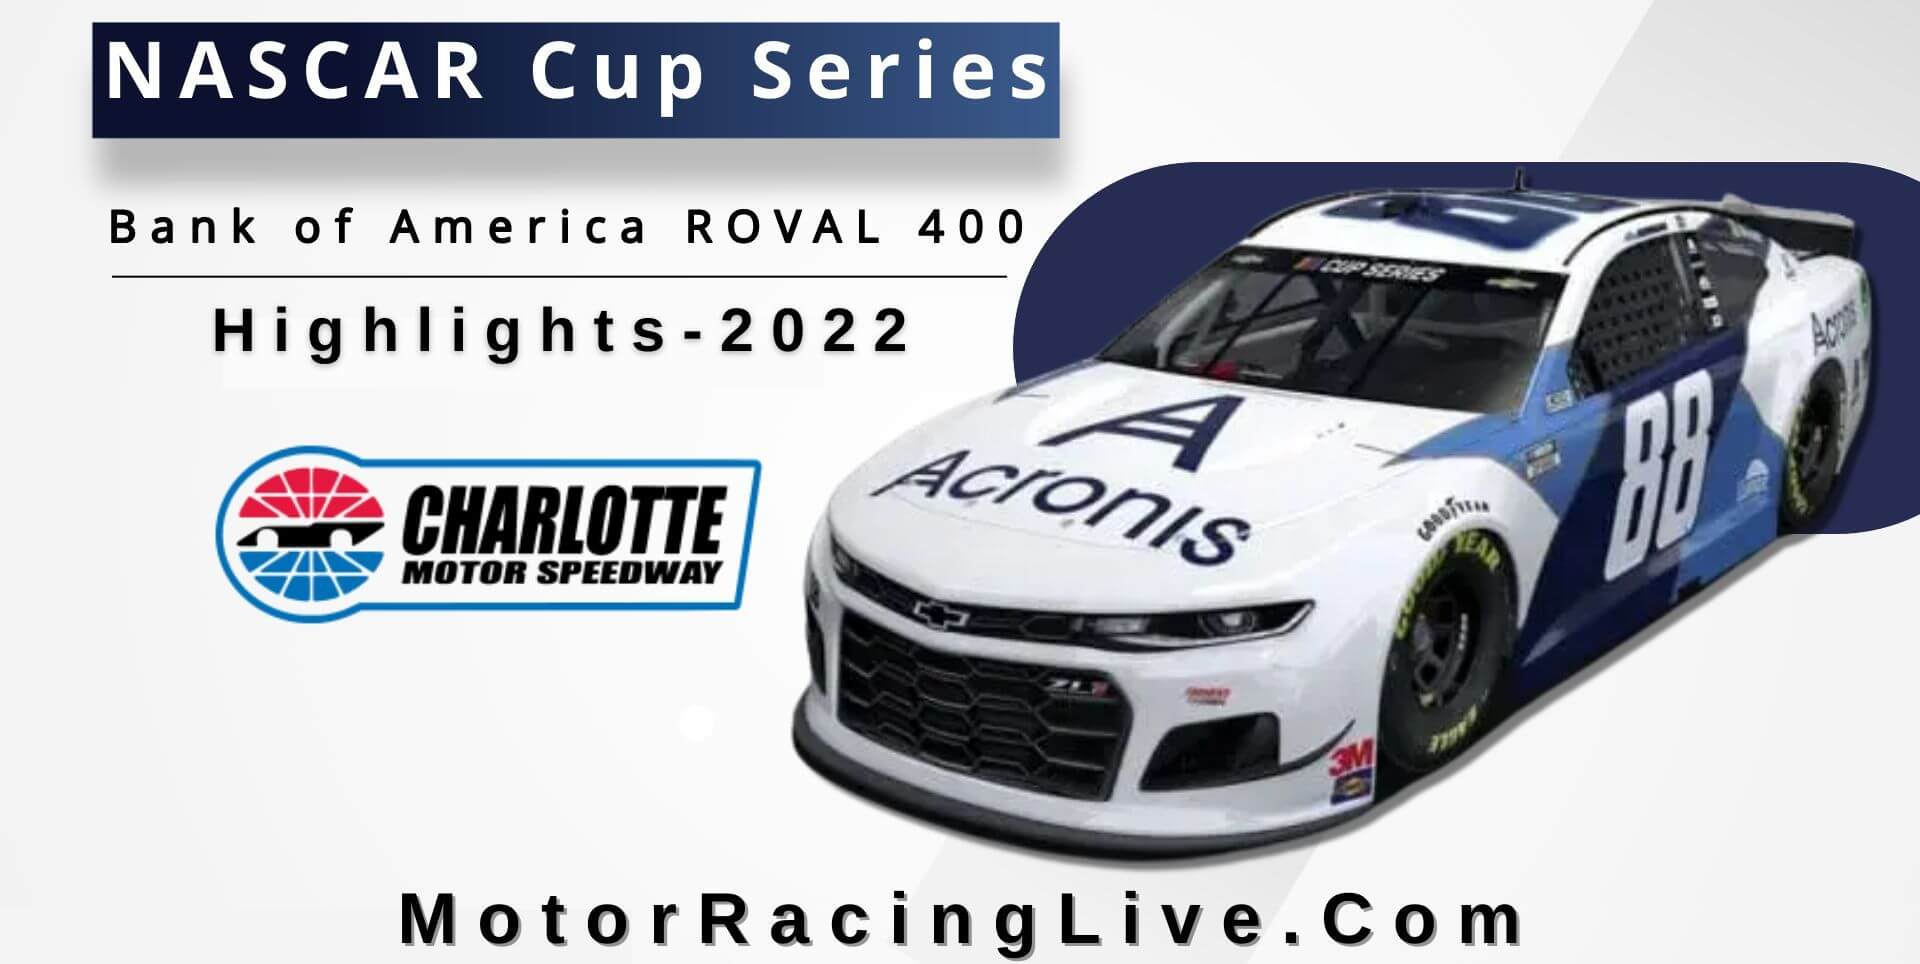 Bank Of America Roval 400 Highlights 2022 NASCAR Cup